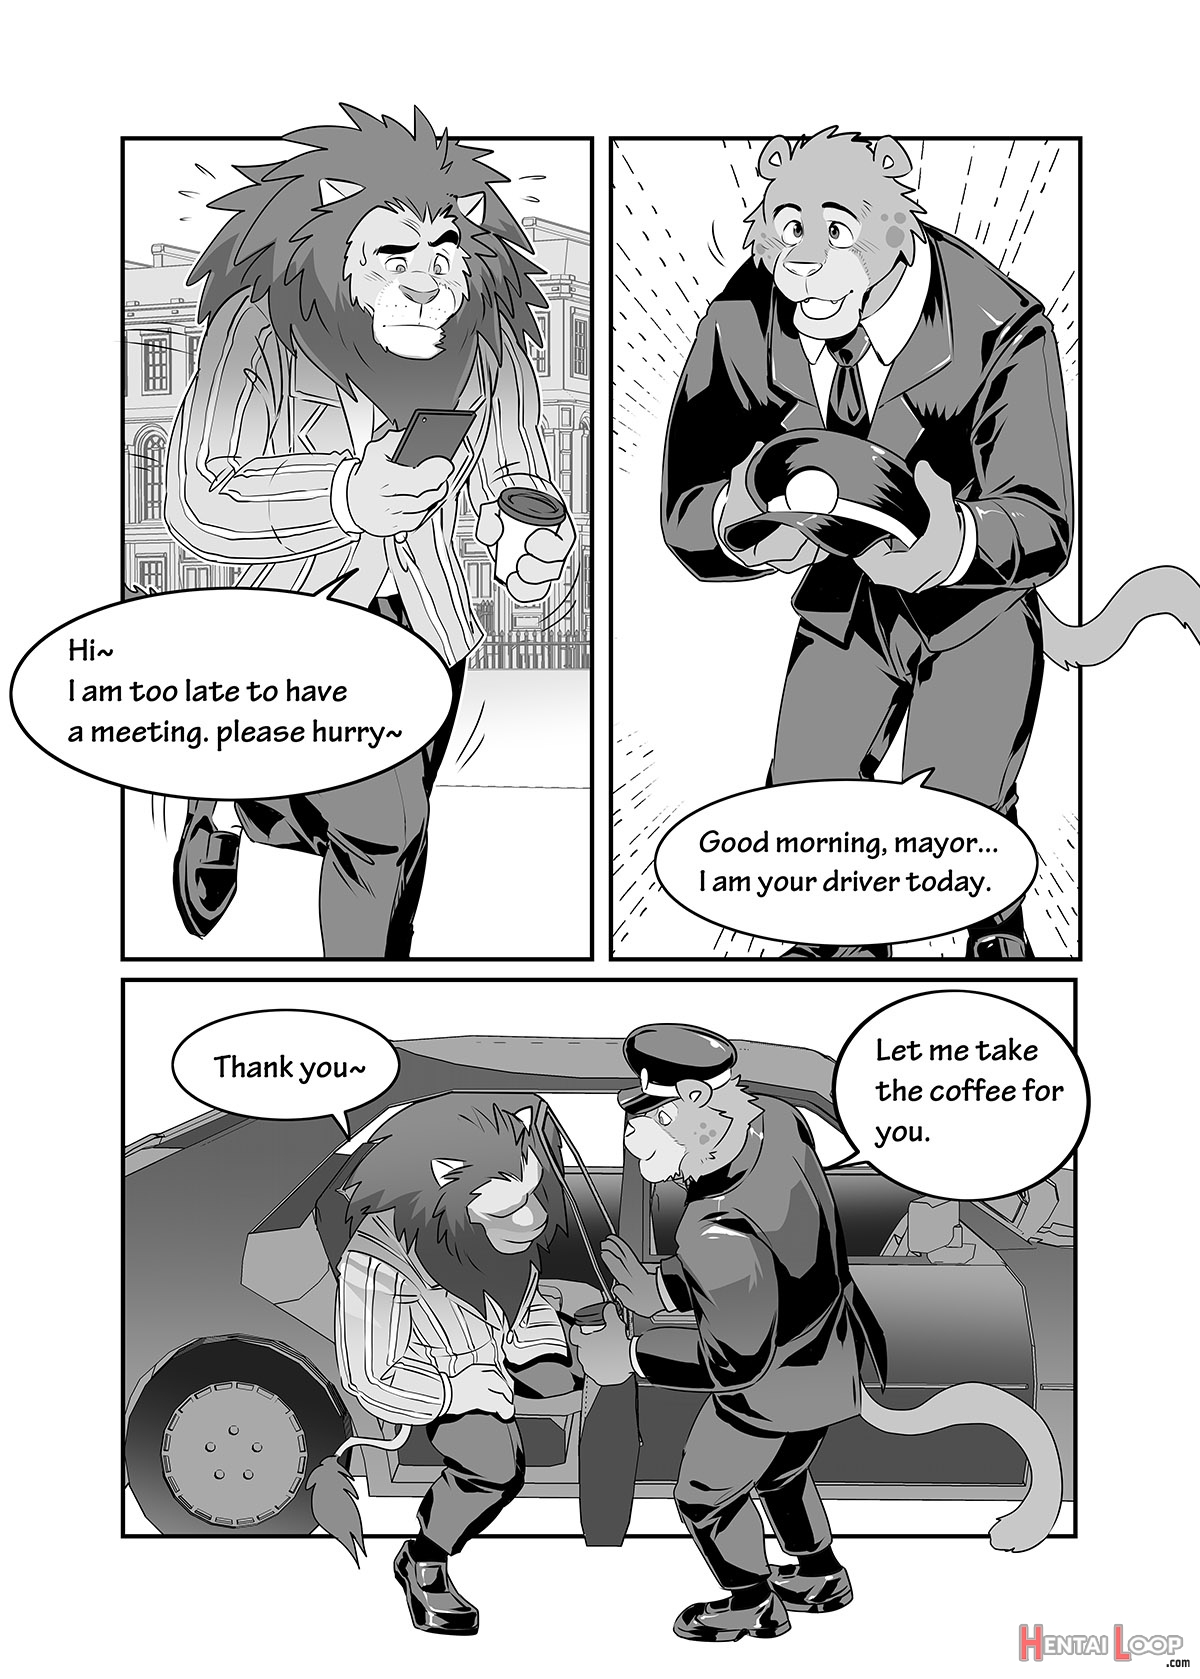 Chief Bogo Found A Dirty Police page 20